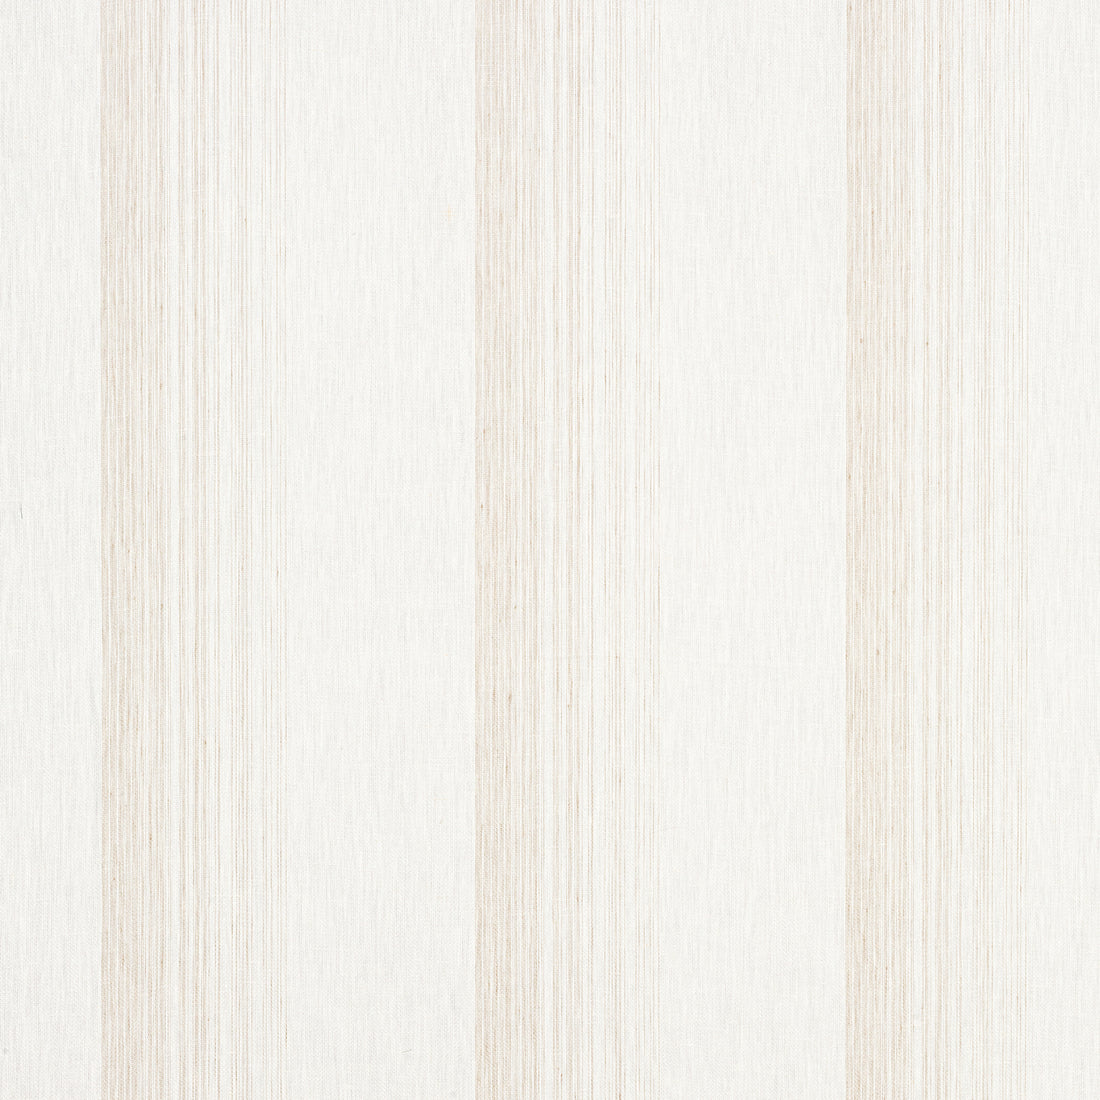 Warwick Stripe fabric in flax color - pattern number FWW7100 - by Thibaut in the Atmosphere collection